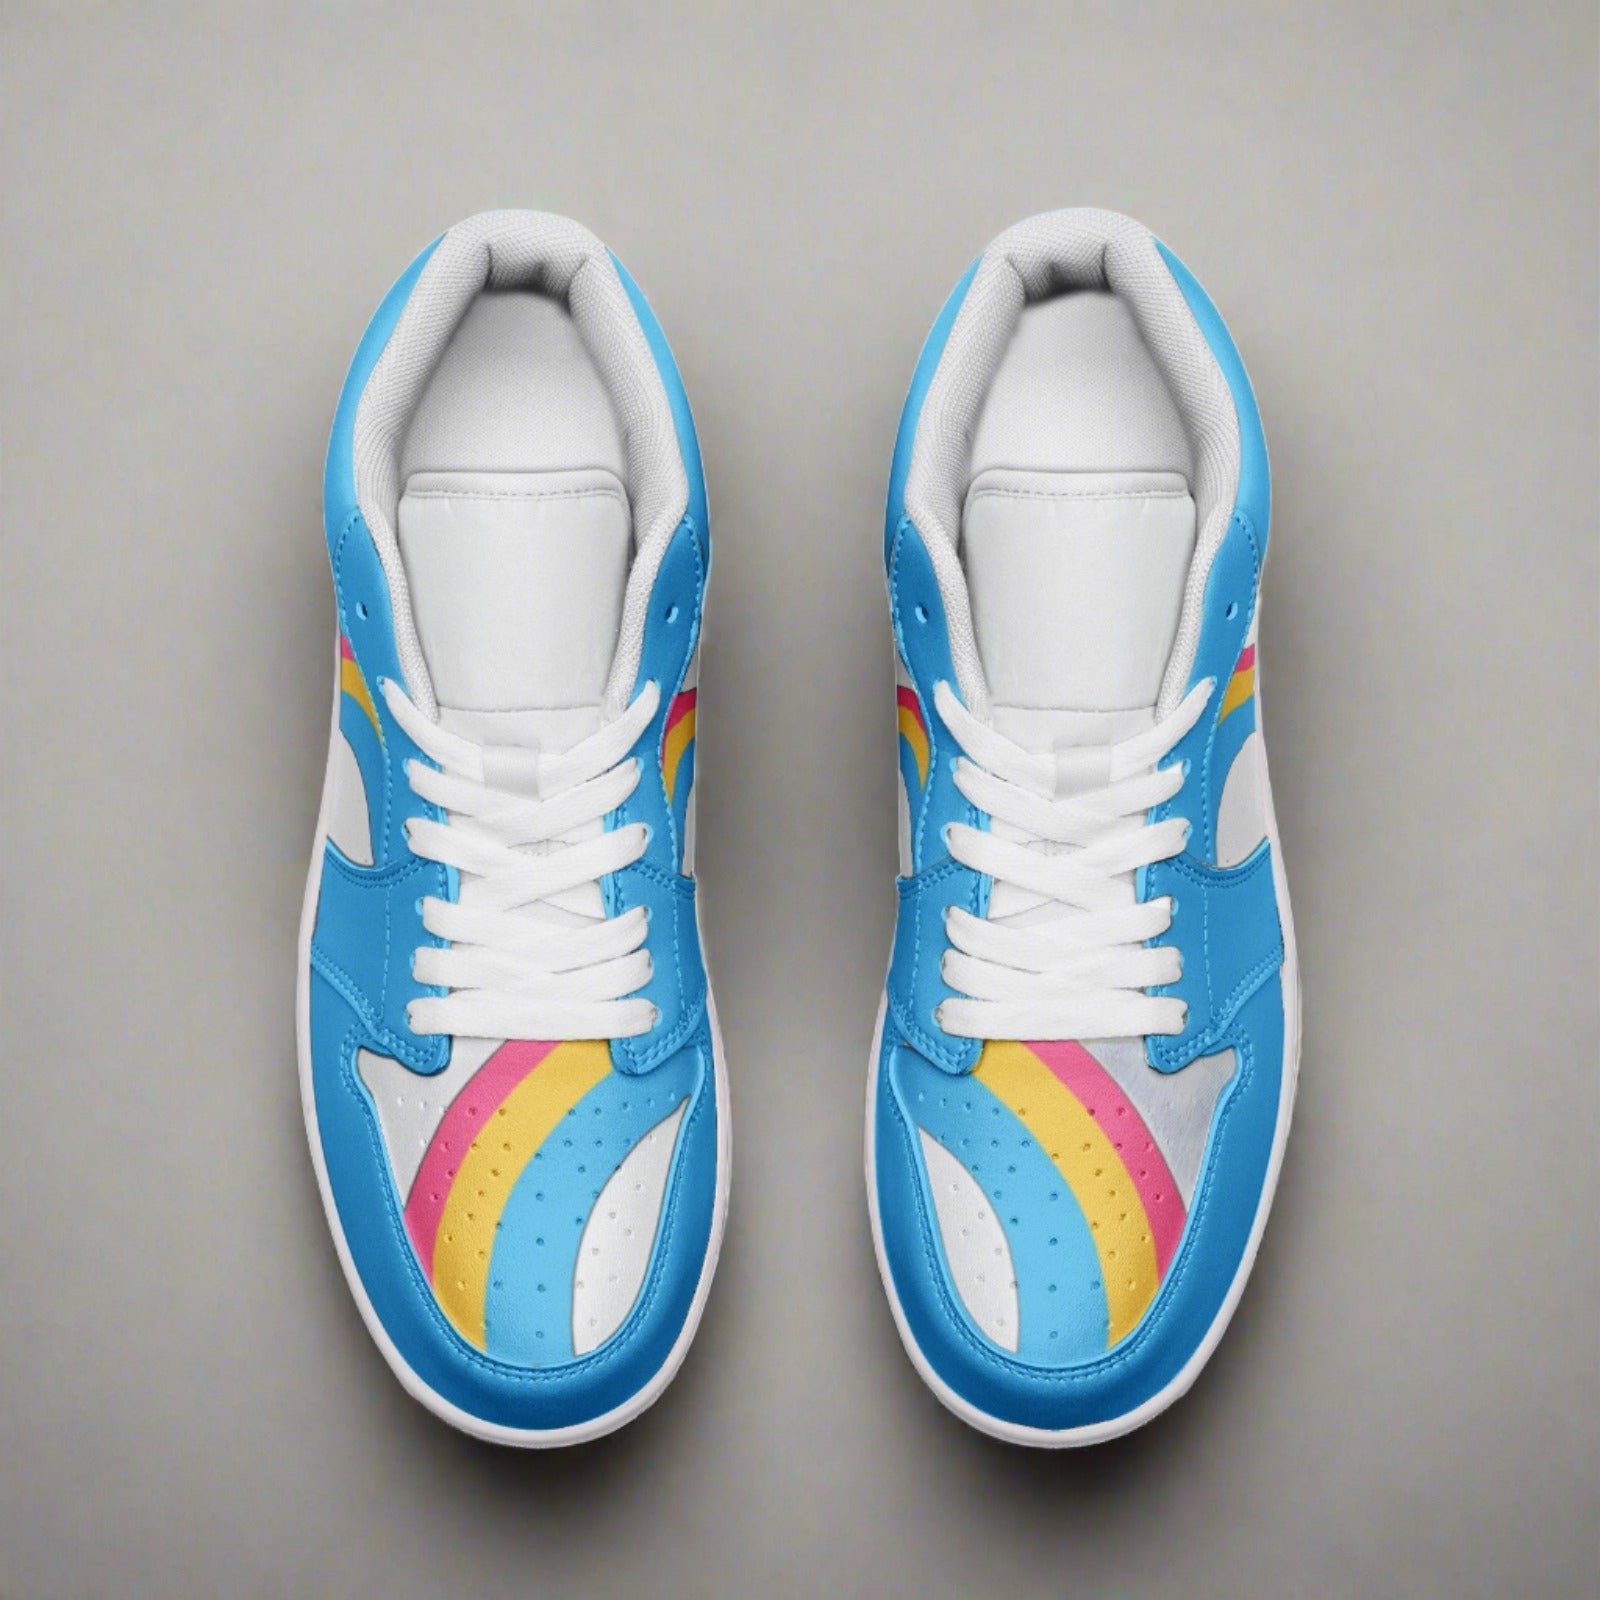 Pansexual Pride Low Top Baby Blue Unisex Sneakers - Rose Gold Co. Shop